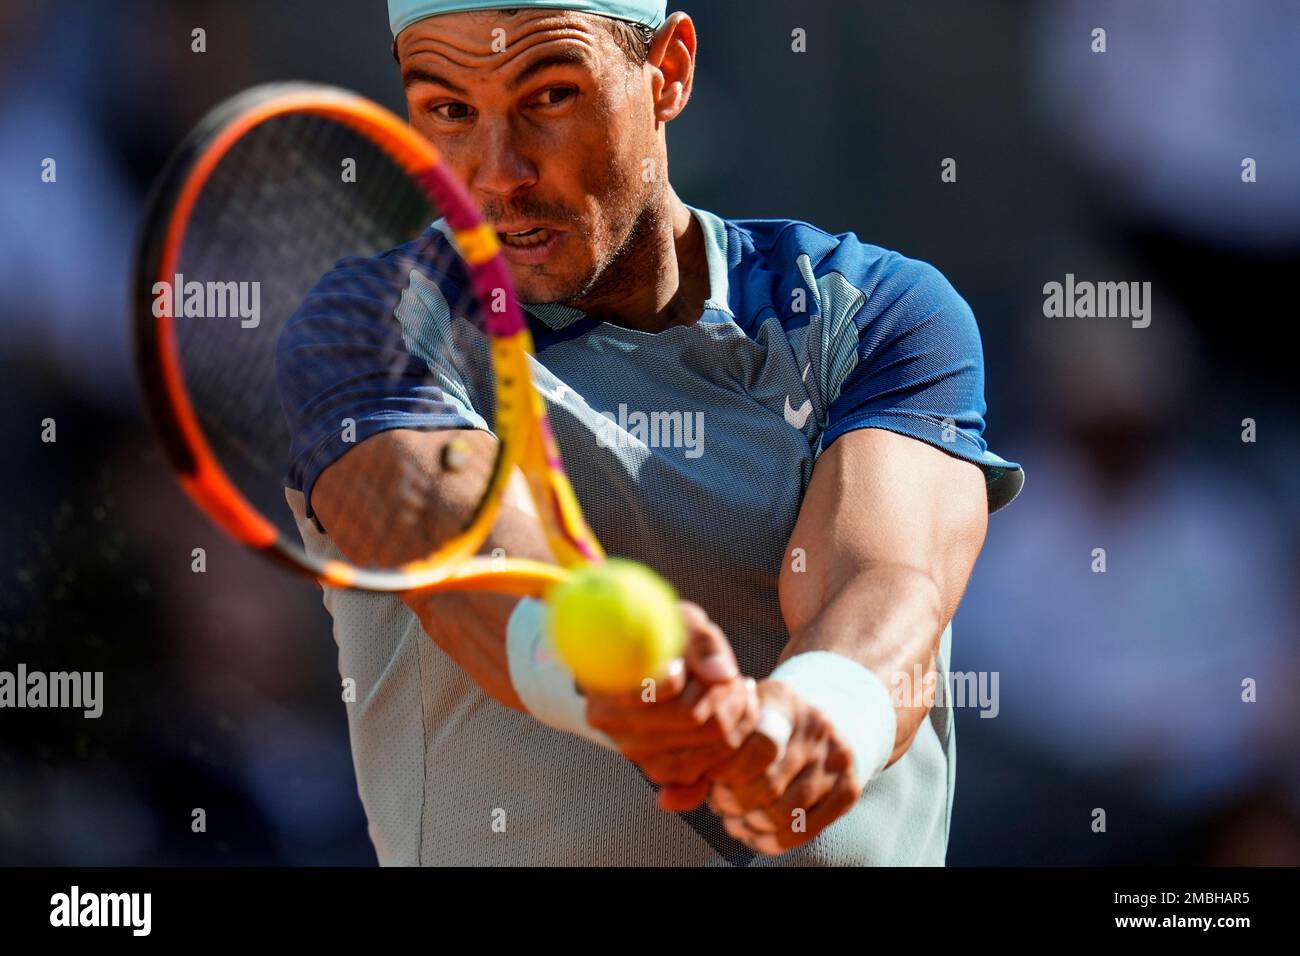 Spains Rafael Nadal returns the ball against David Goffin of Belgium during their match at the Mutua Madrid Open tennis tournament in Madrid, Spain, Thursday, May 5, 2022